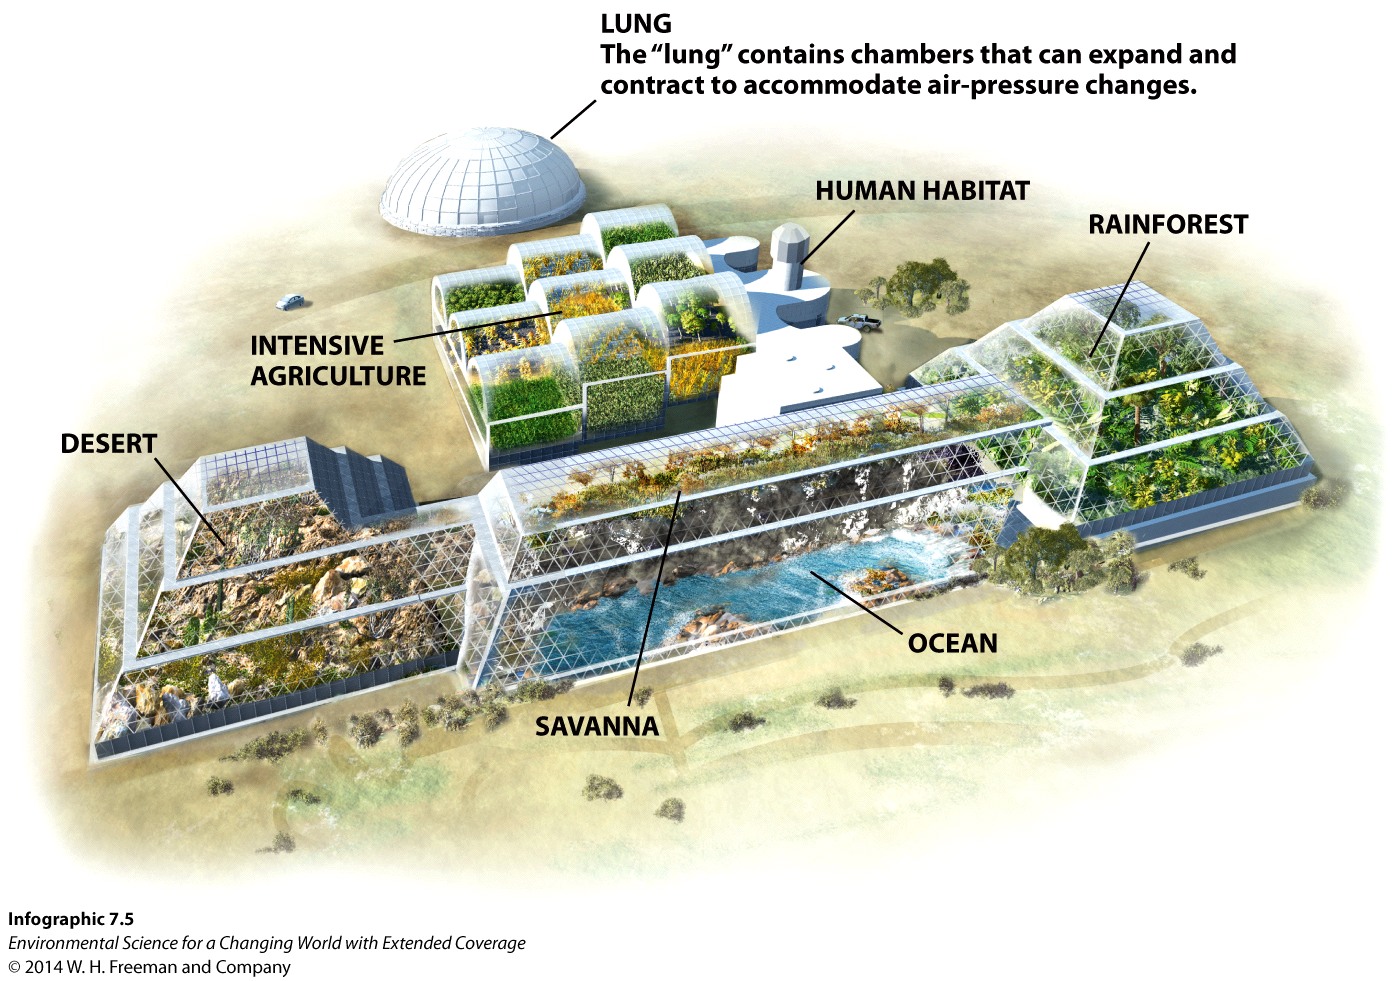 Infographic 7.5: Map of Biosphere 2